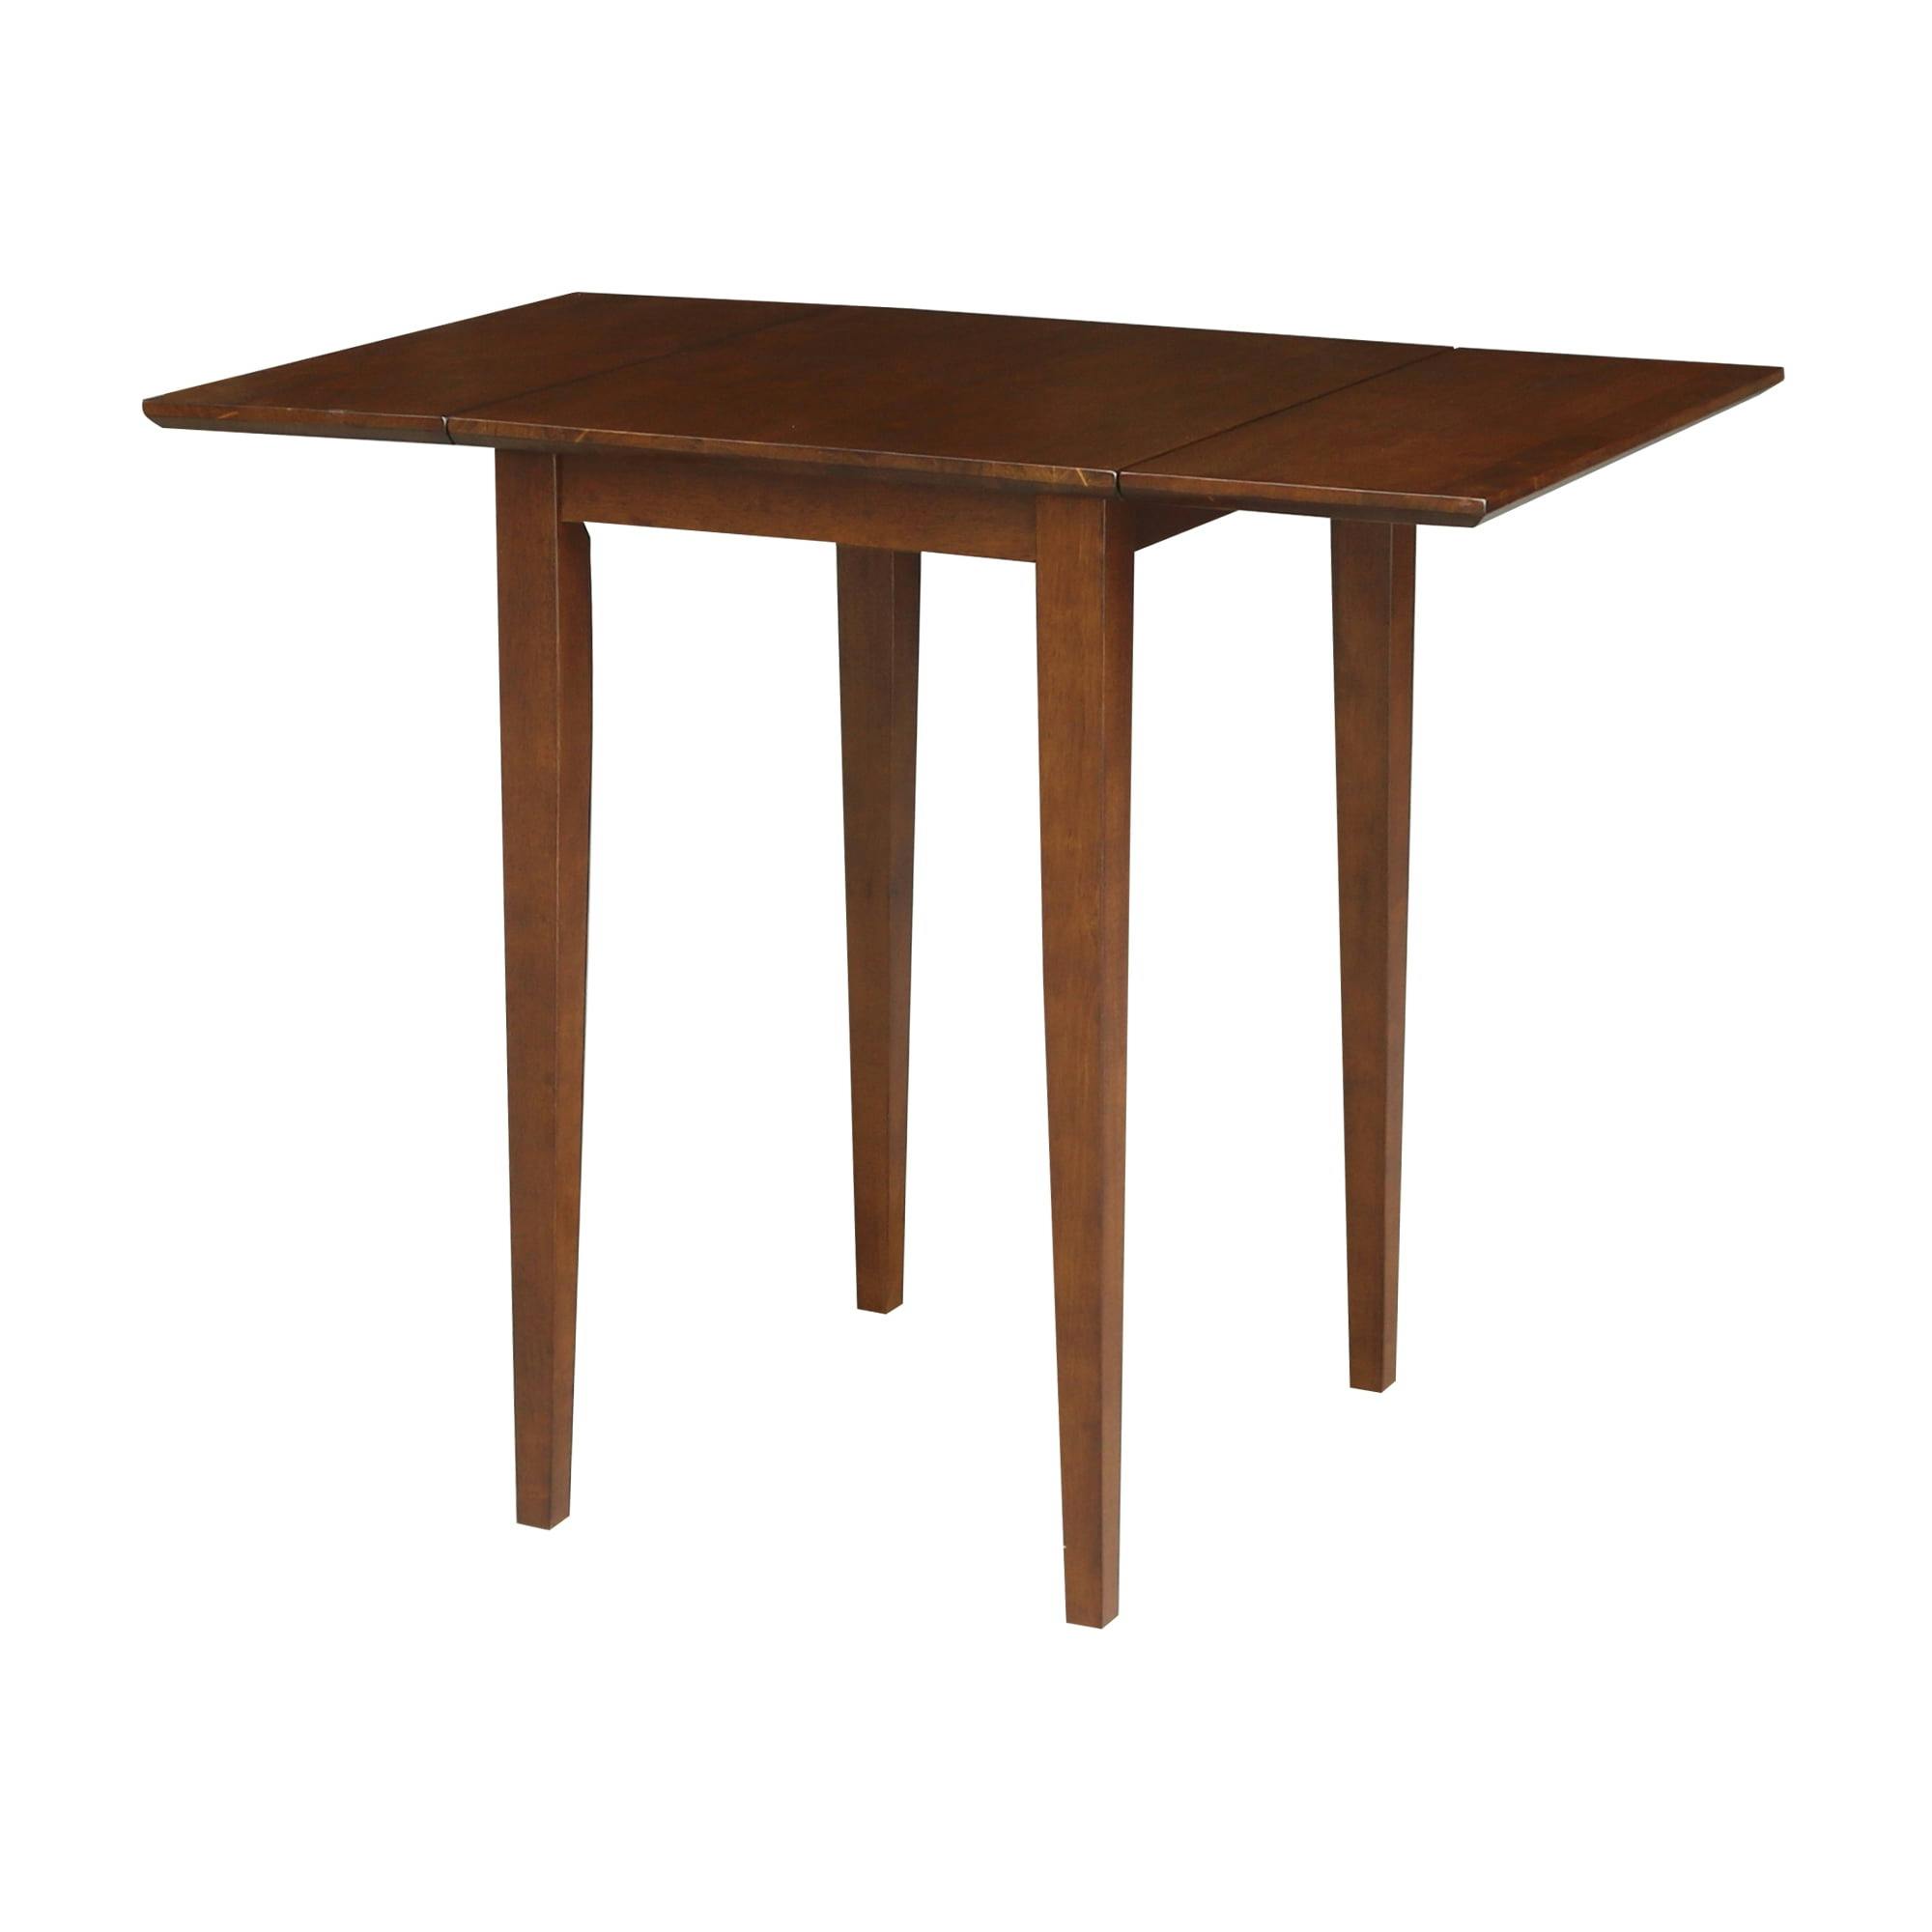 Espresso Solid Parawood Shaker Style Extendable Dining Table